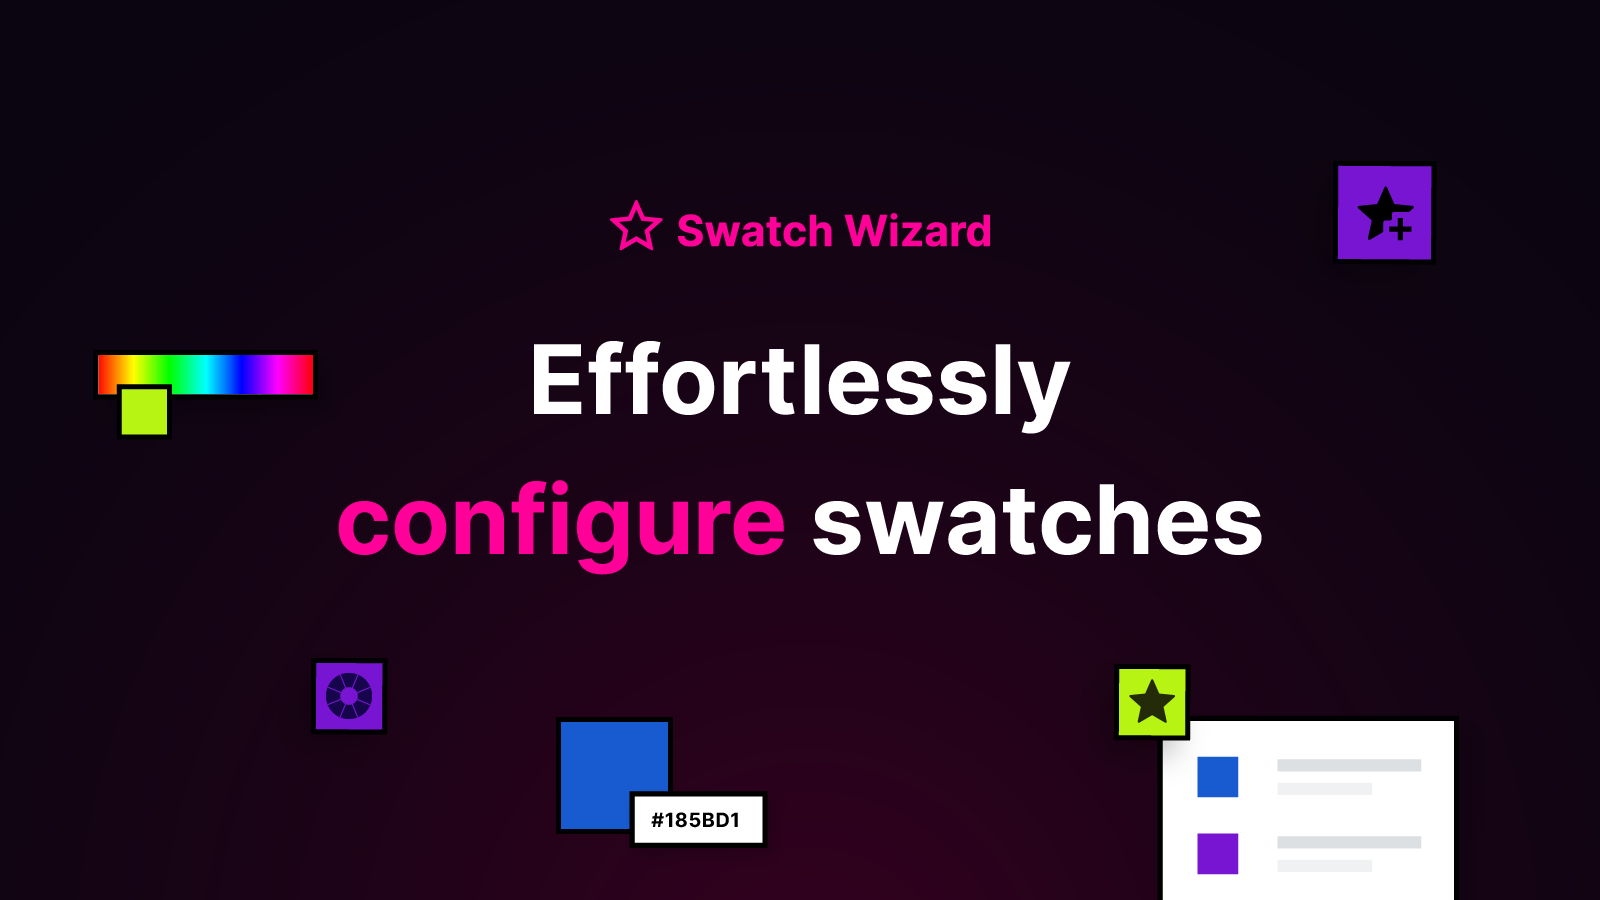 Effortlessly configure swatches